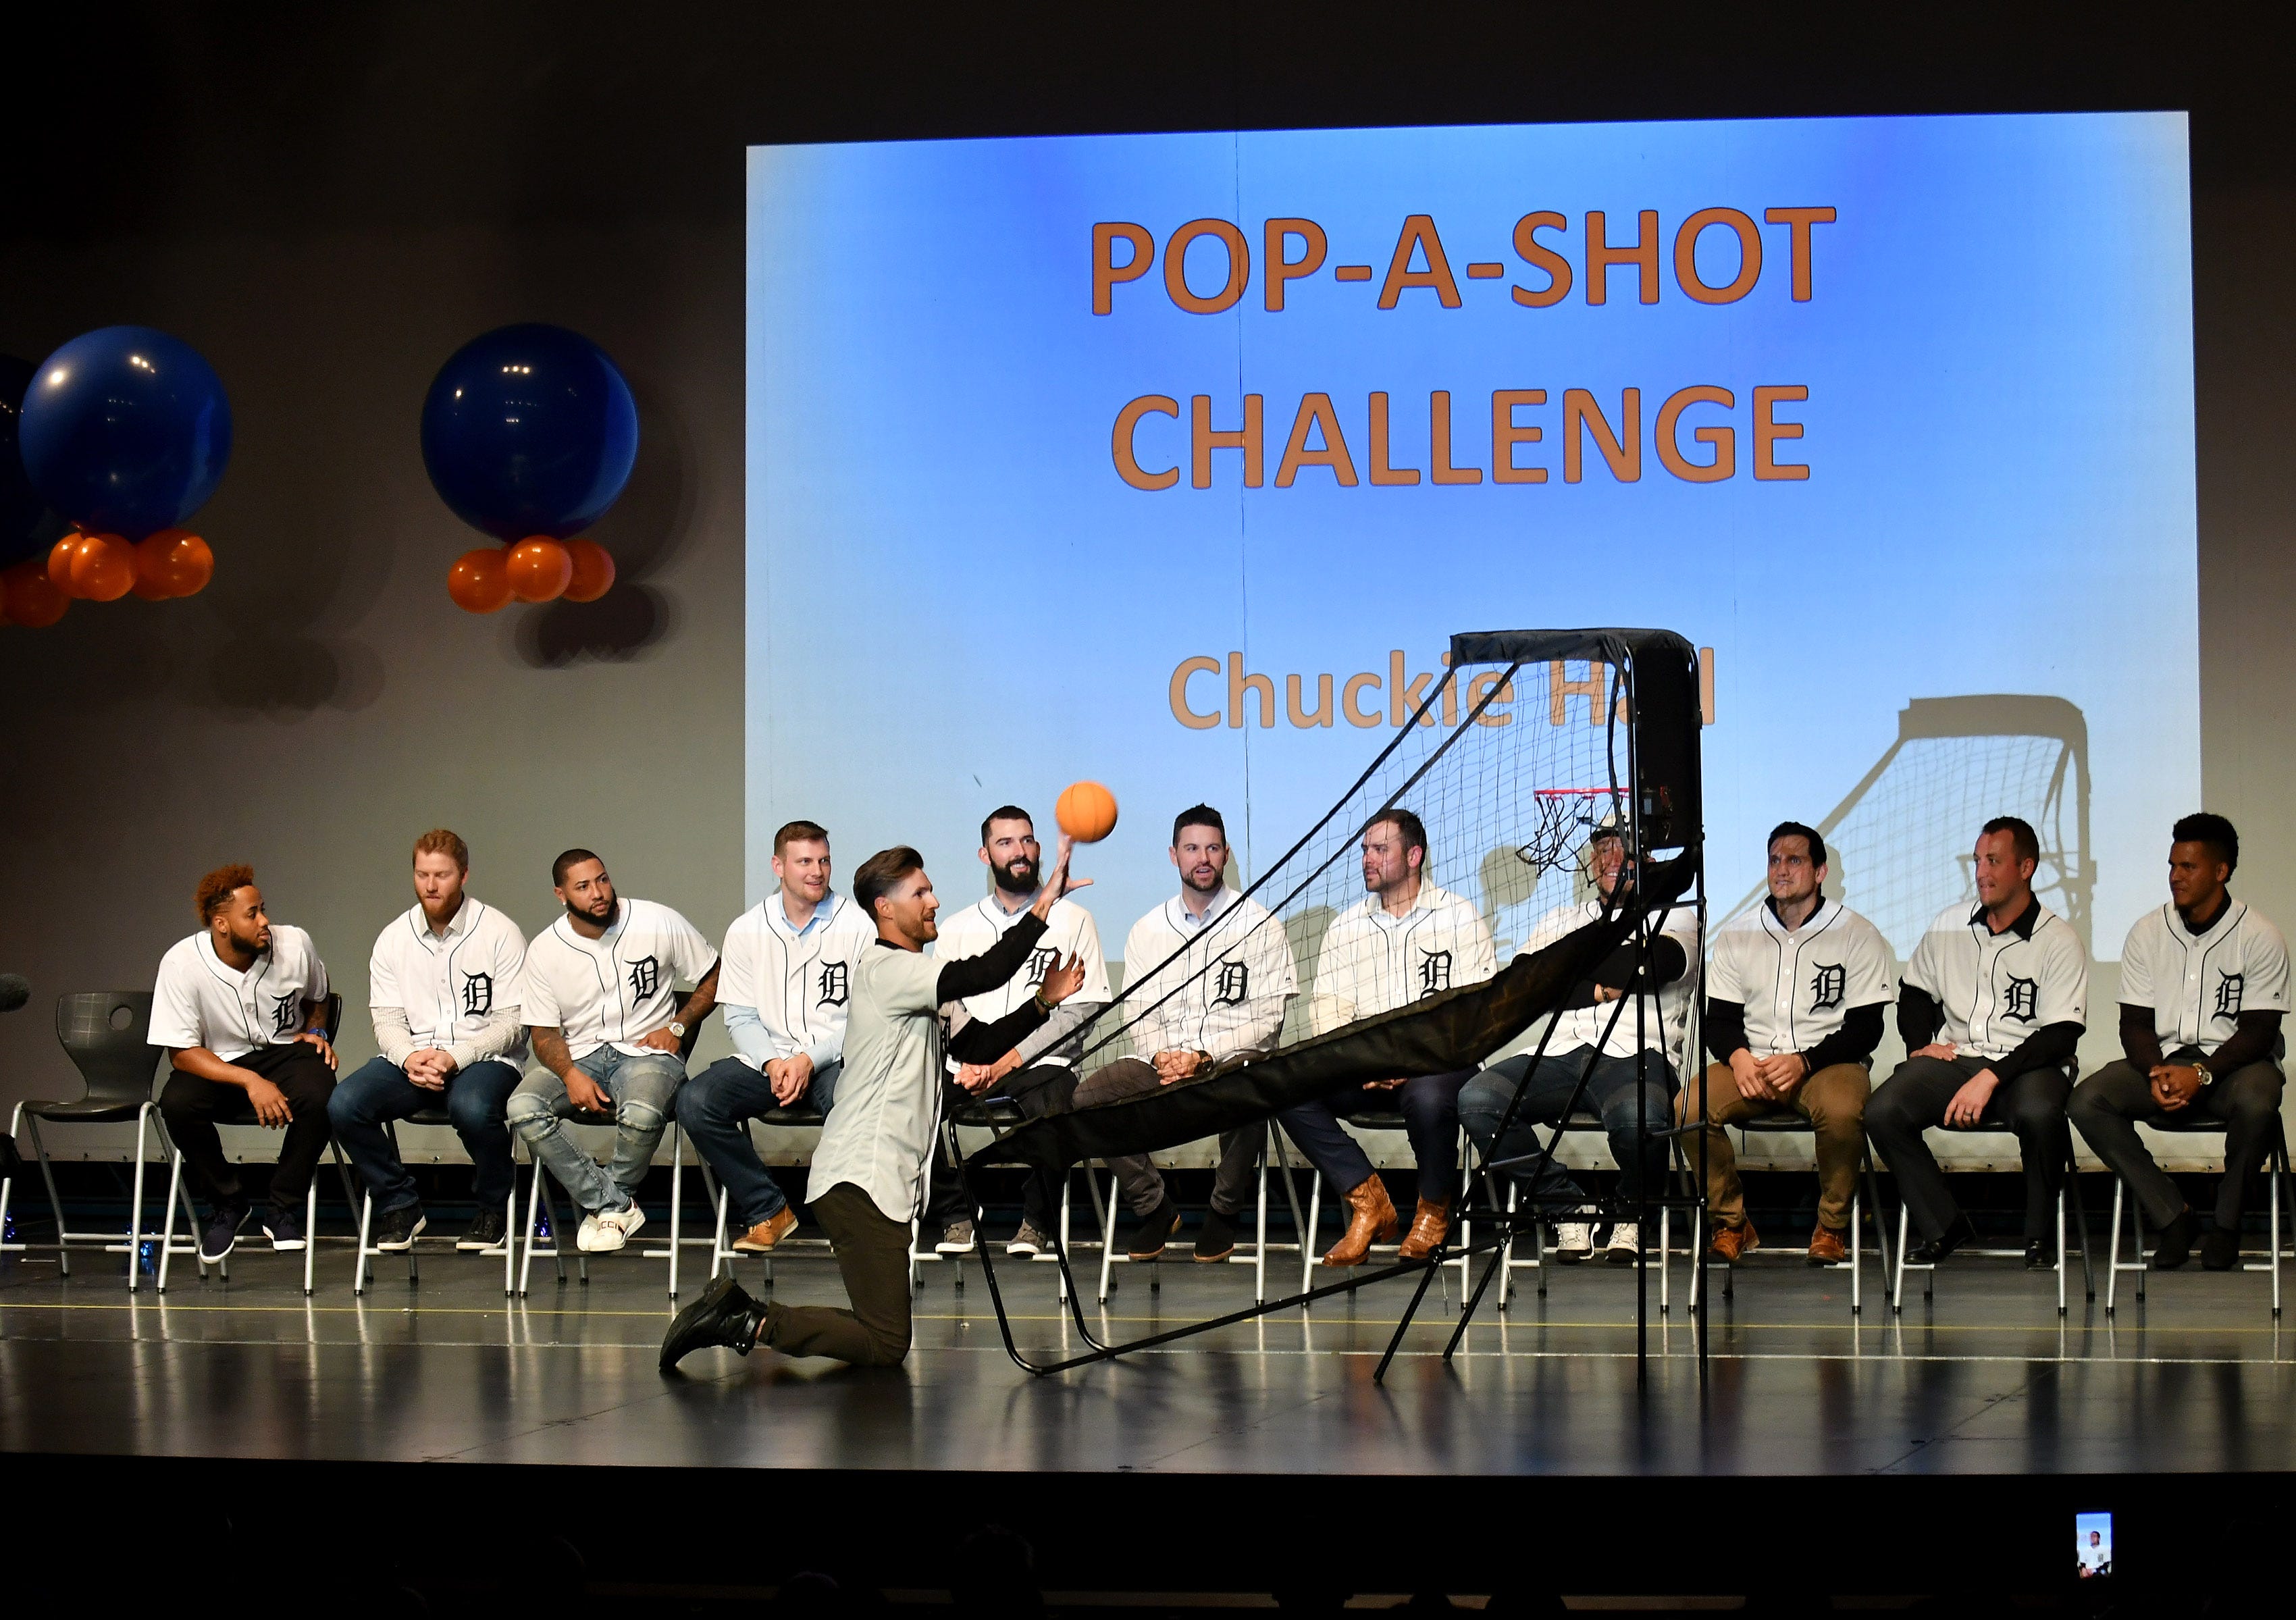 Tigers pitcher Shane Greene competes in a pop-a-shot challenge at a kids rally at Novi High School.